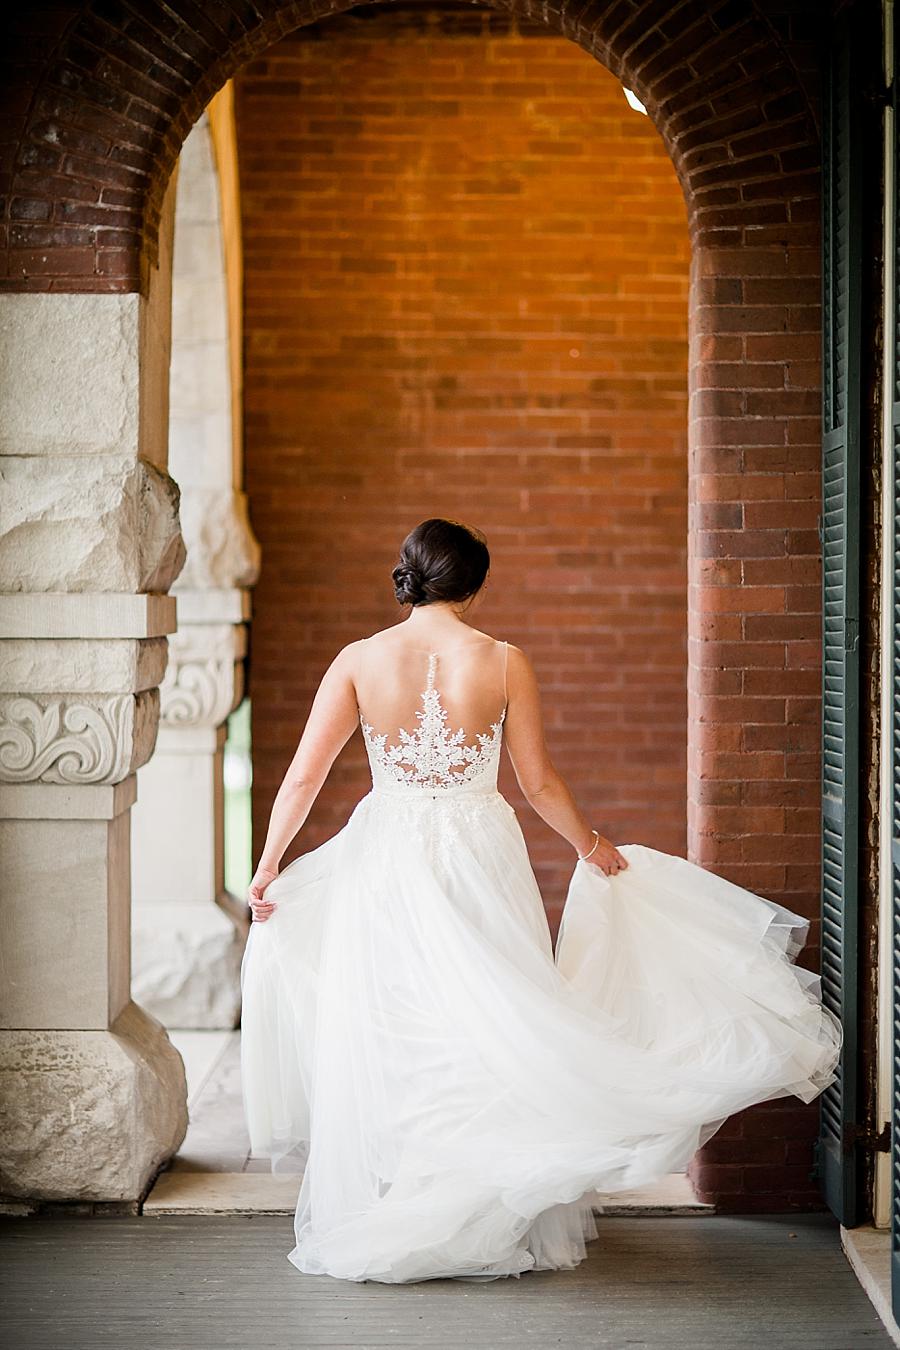 Twirling the bridal gown at this Historic Westwood Bridal Session by Knoxville Wedding Photographer, Amanda May Photos.